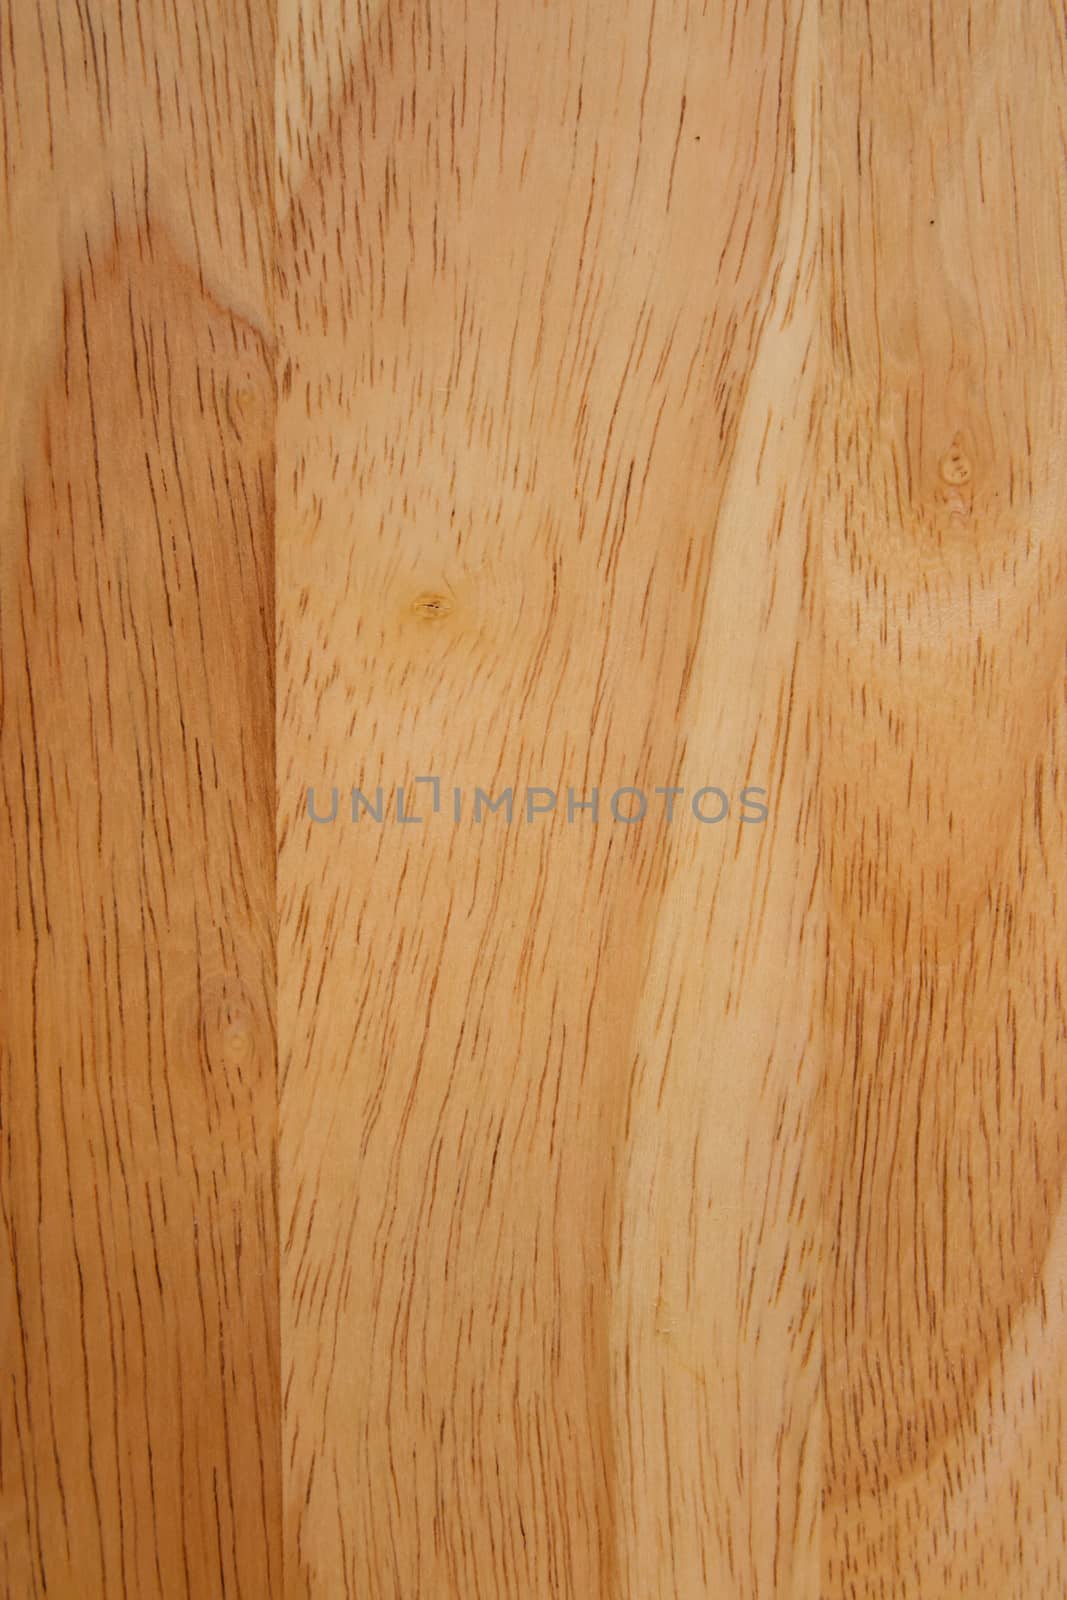 The smooth, polished surface made of natural hardwood trees cont